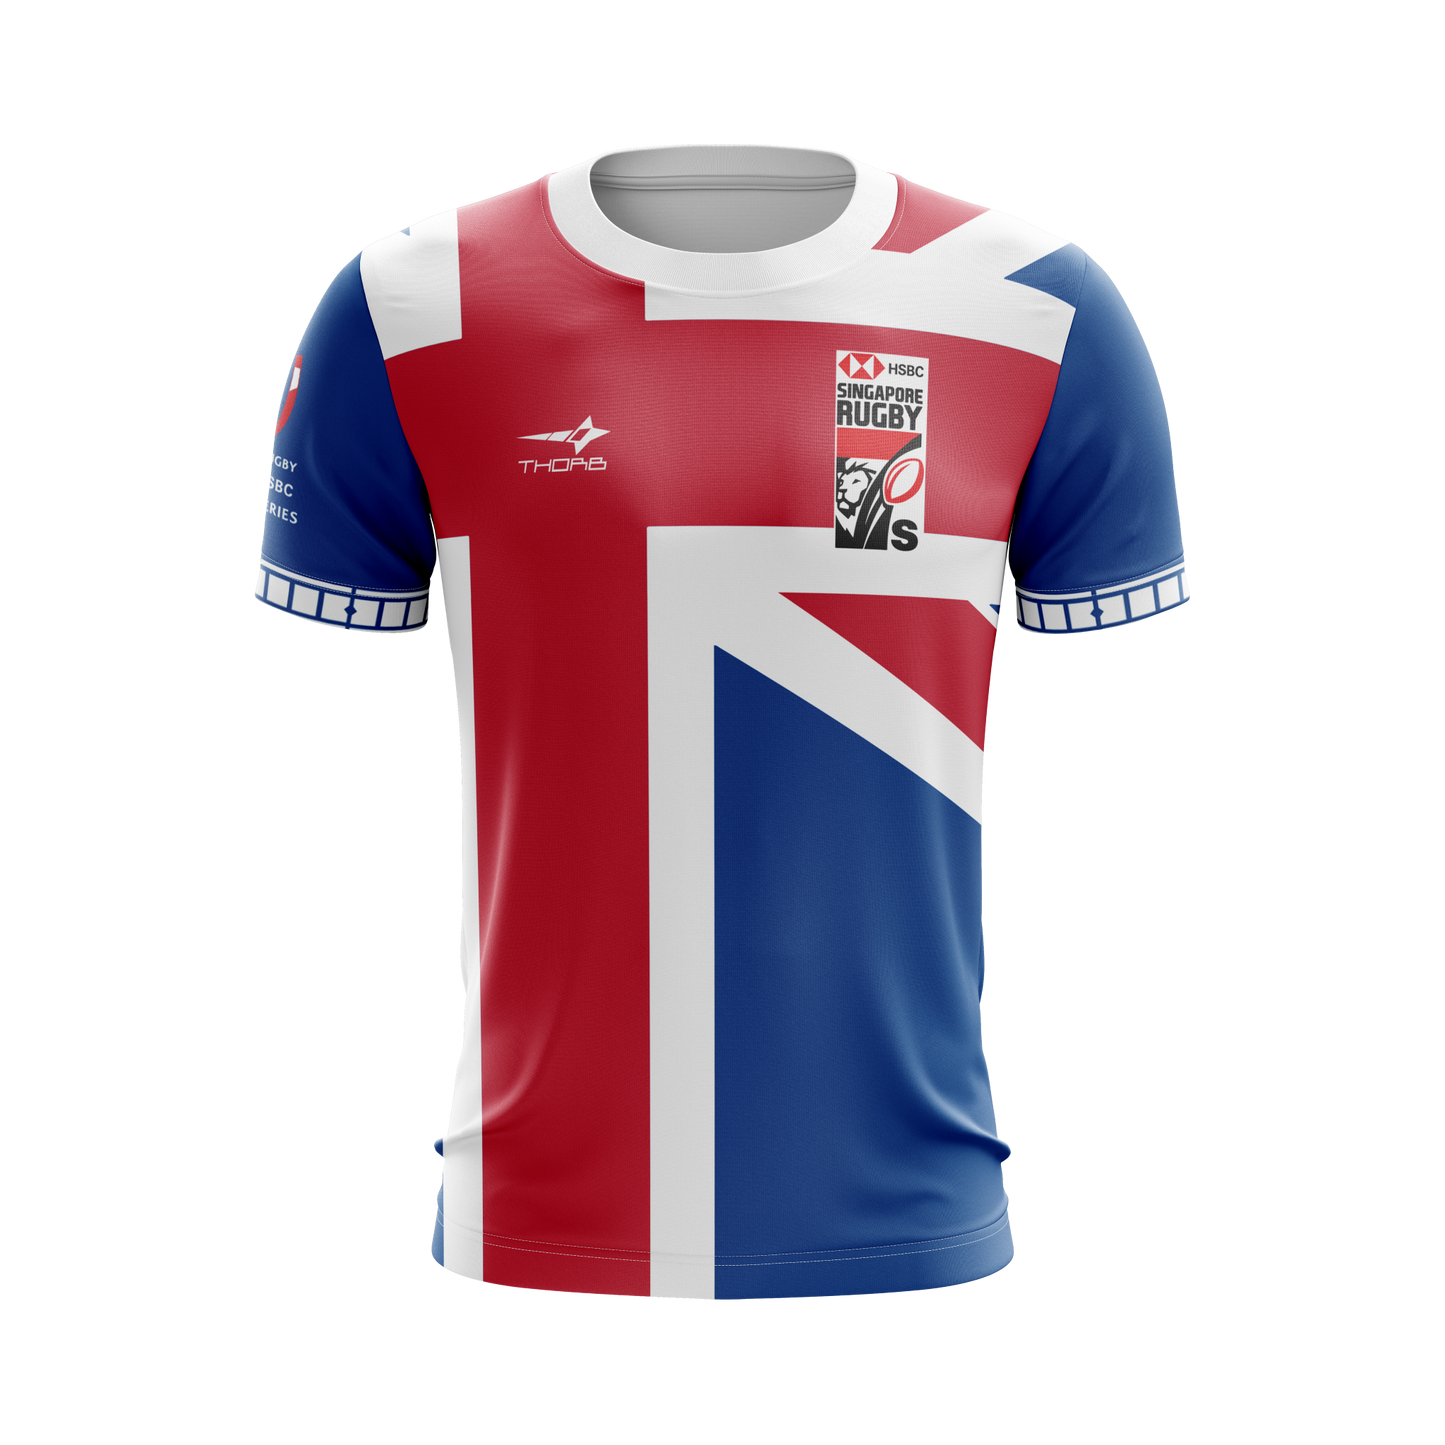 HSBC 7s GREAT BRITAIN ATHLETIC JERSEY